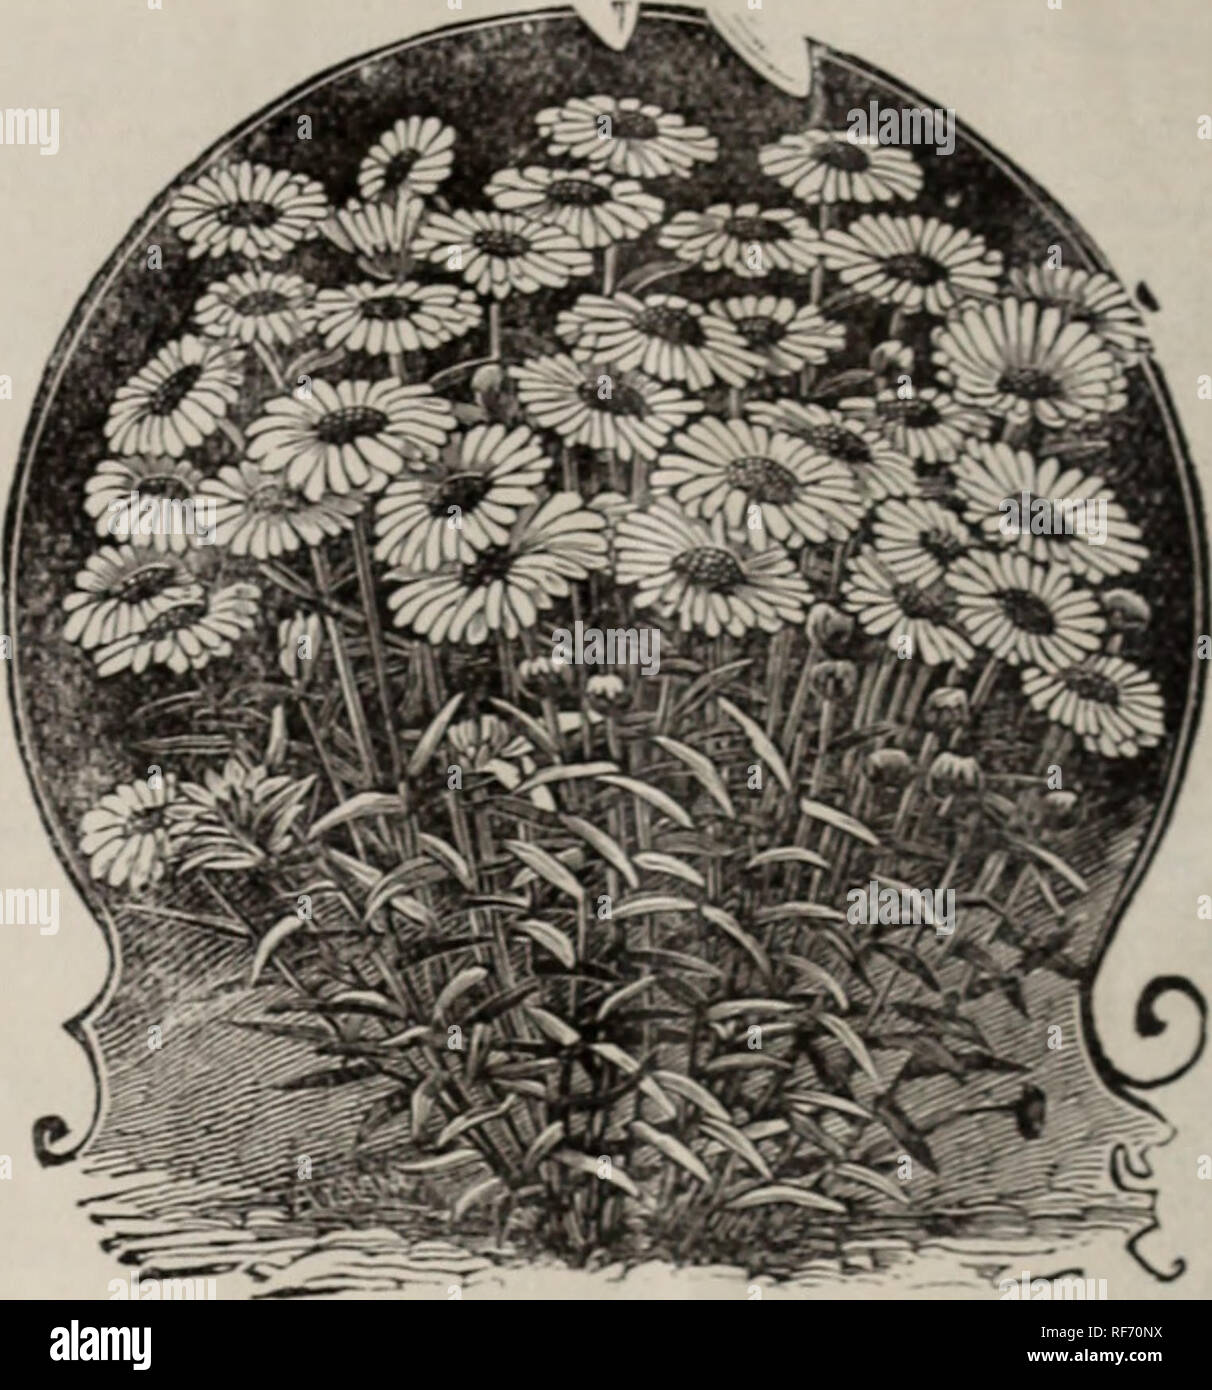 . 1902 trade list. Nursery stock Ohio Catalogs; Plants, Ornamental Catalogs; Roses Catalogs; Flowers Catalogs; Bulbs (Plants) Catalogs. Marguerite Daisies. Marguerite Daisy, Madame Gallbert.âThisis one of the finest new plants that has ever b. en intrcnluced. Nothing can be imagineil that is finer. .Ml know the old varieties of I'aris Daisies, how beautiful annis constantly, and will proc. It is certainly a charming plant. The cut-flower stores in the cities iiÂ«e them by the hundreds of thousand!&quot;. IUooiik t'roin November to .lune. Very desirable. 50 cents per dozrii; 83.OO per hundred.  Stock Photo